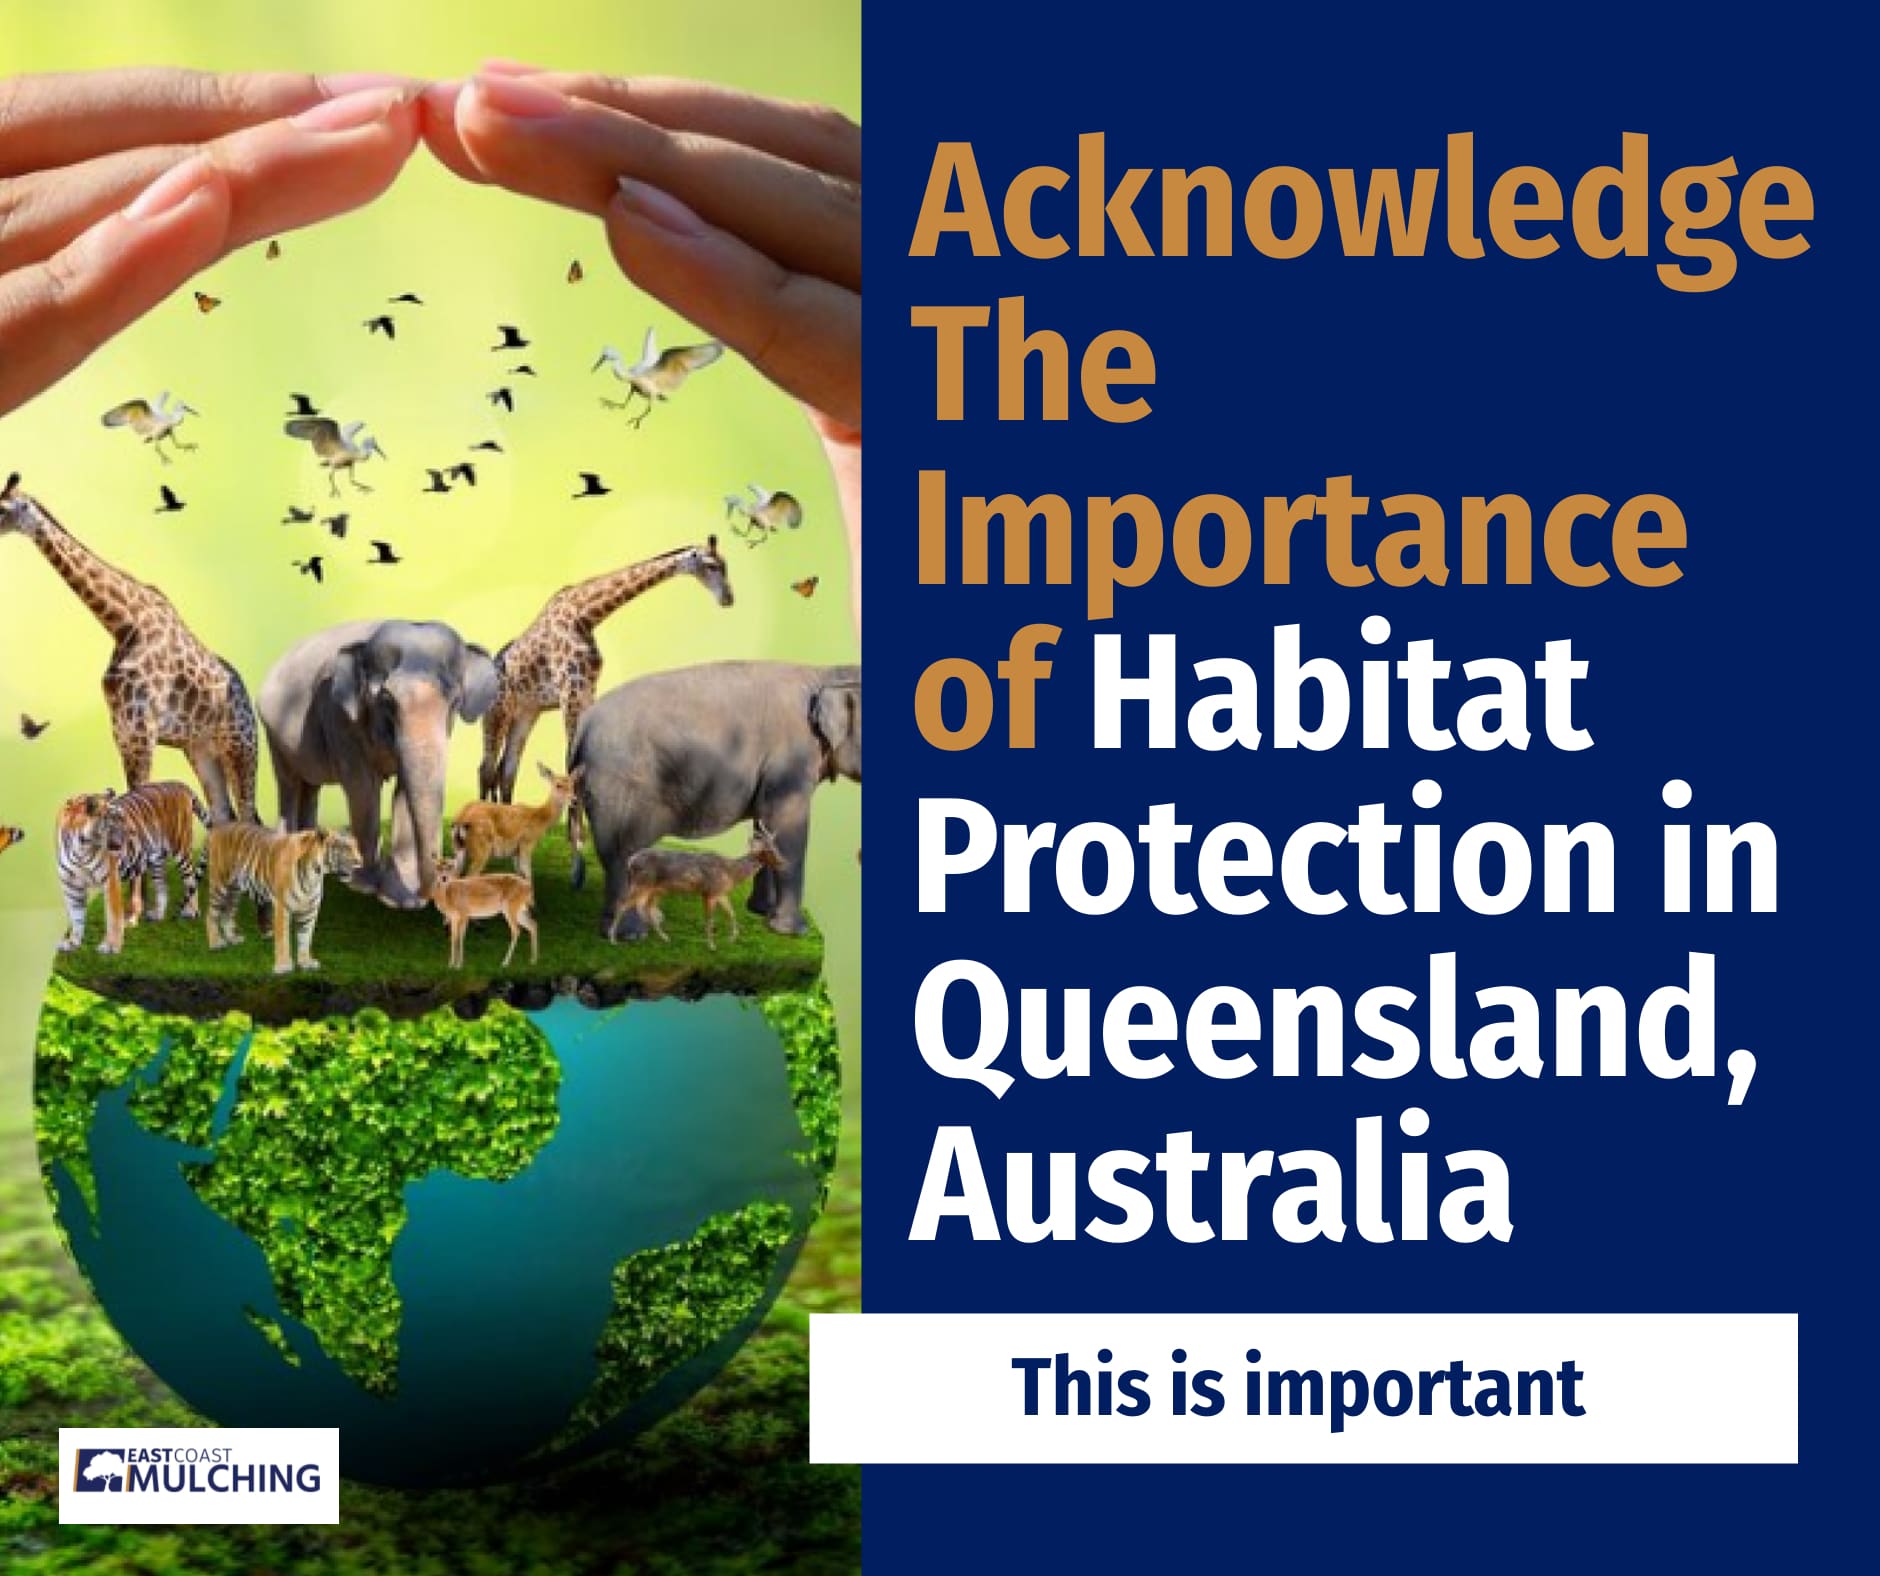 Acknowledge The Importance of Habitat Protection in Queensland, Australia